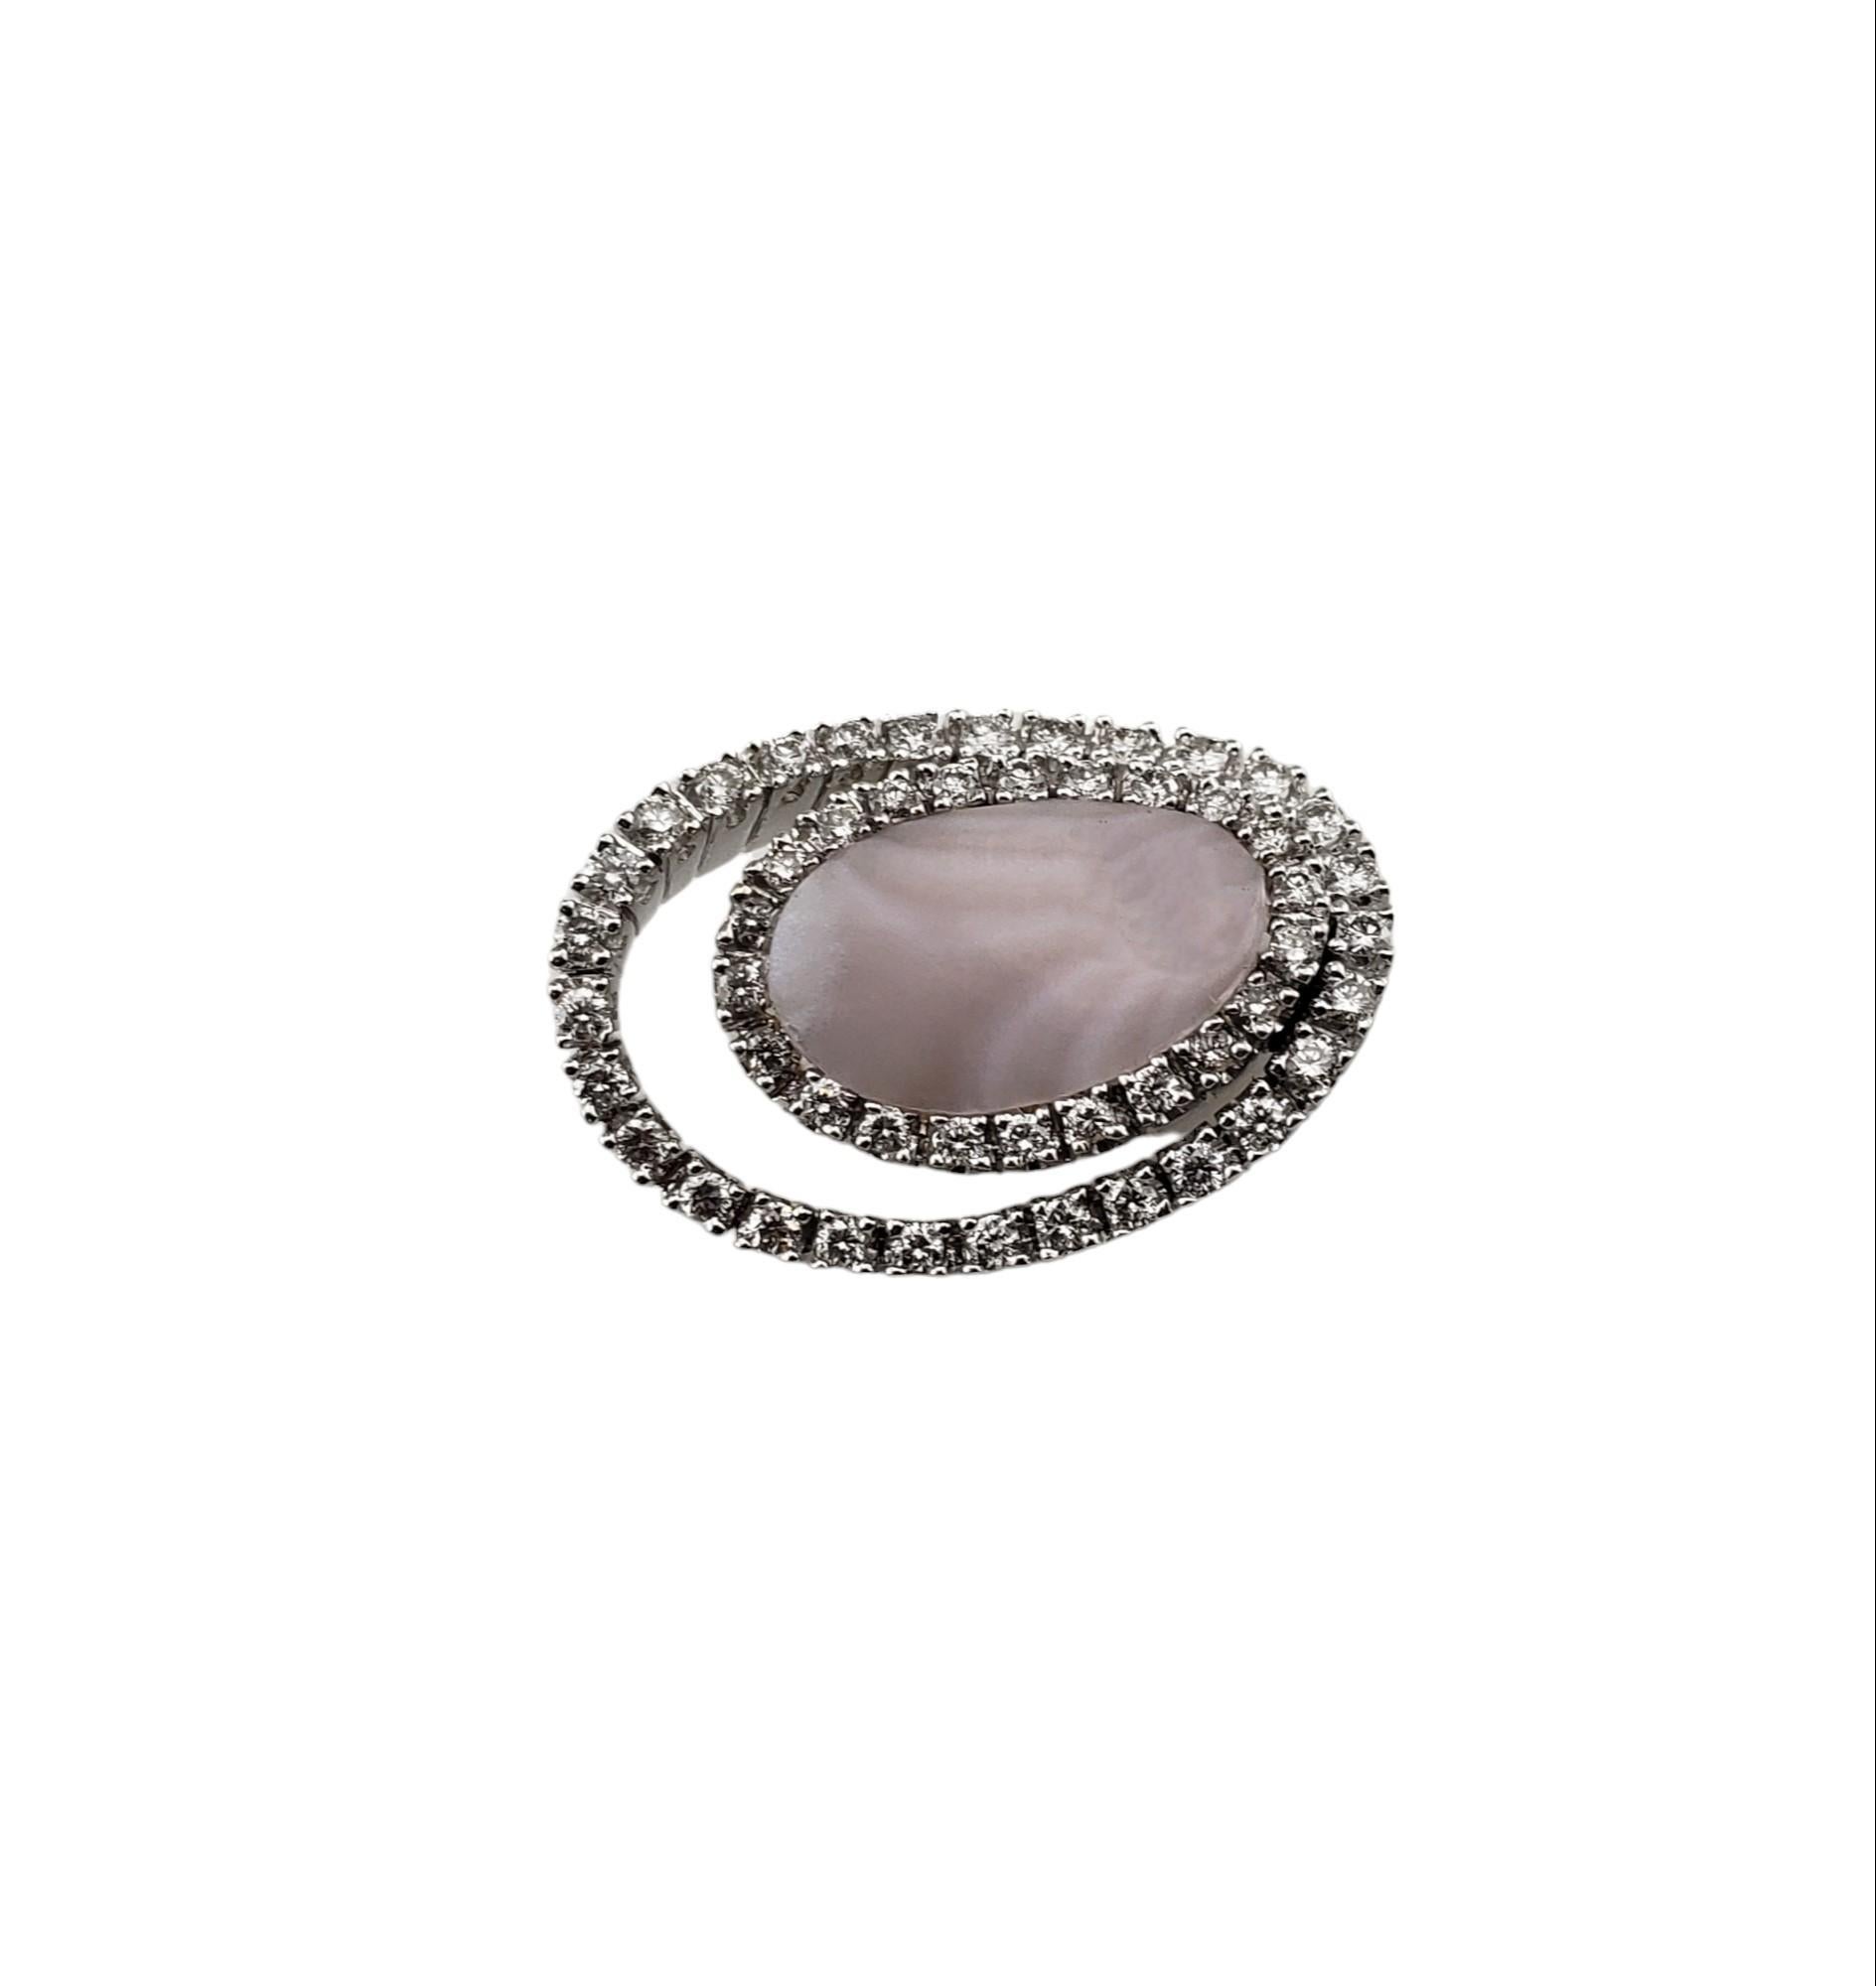 Vintage 14 Karat White Gold Mother of Pearl and Diamond Pendant JAGi Certified-

This stunning pendant features one oval light pink mother of pearl shell surrounded by 51 round brilliant cut diamonds set in classic 14K white gold.

Total diamond